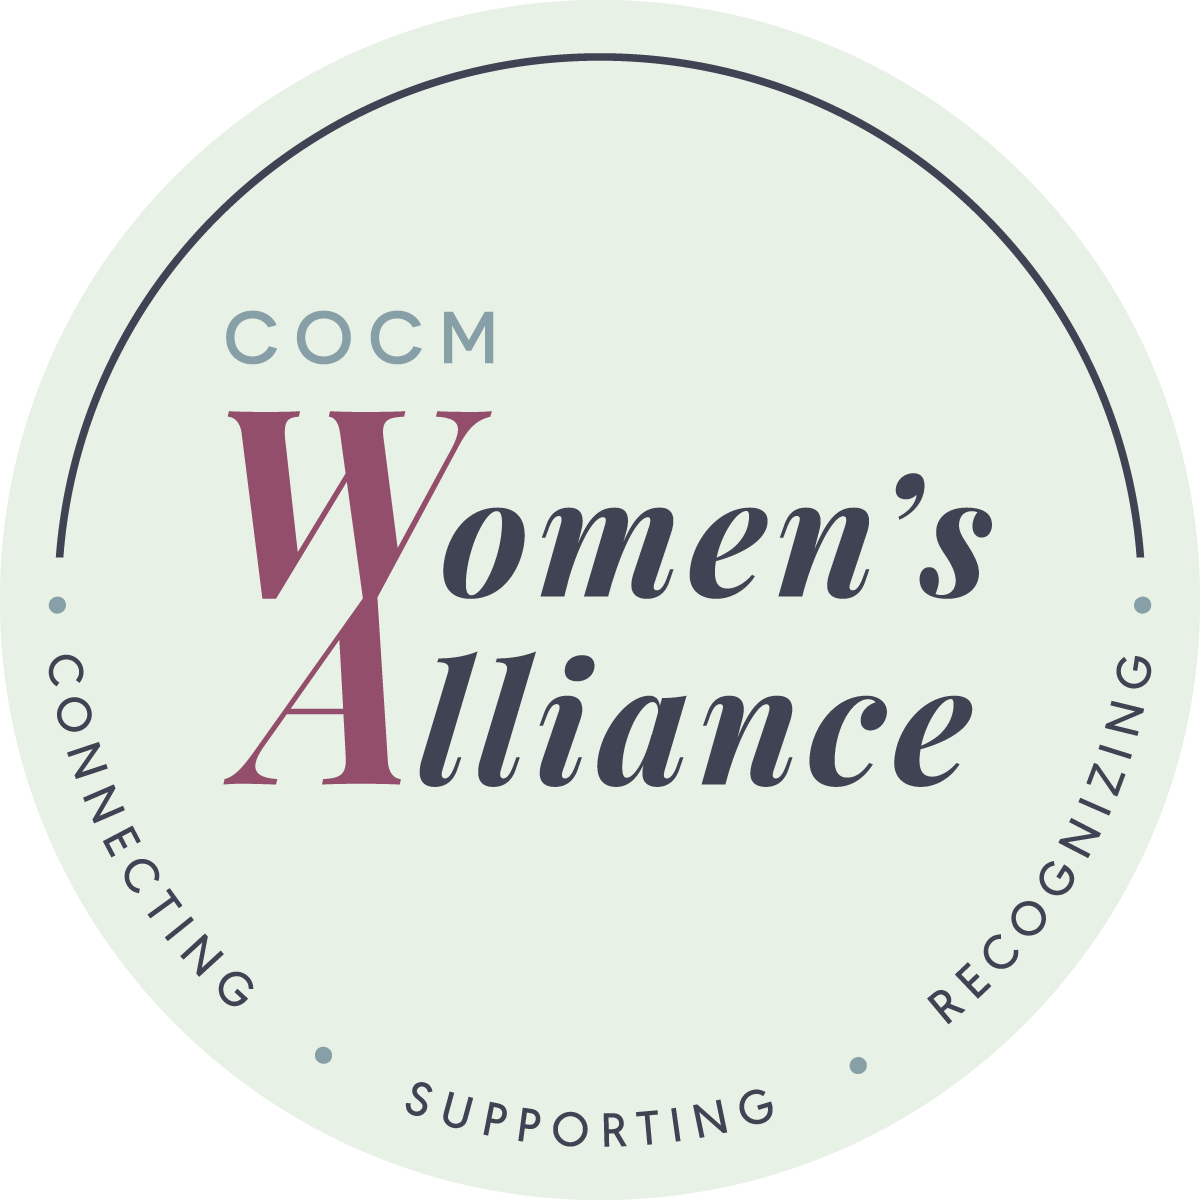 The COCM Women’s Alliance (Logo Above) is intending to present the Women’s Leadership award annually to a member of the higher education community.